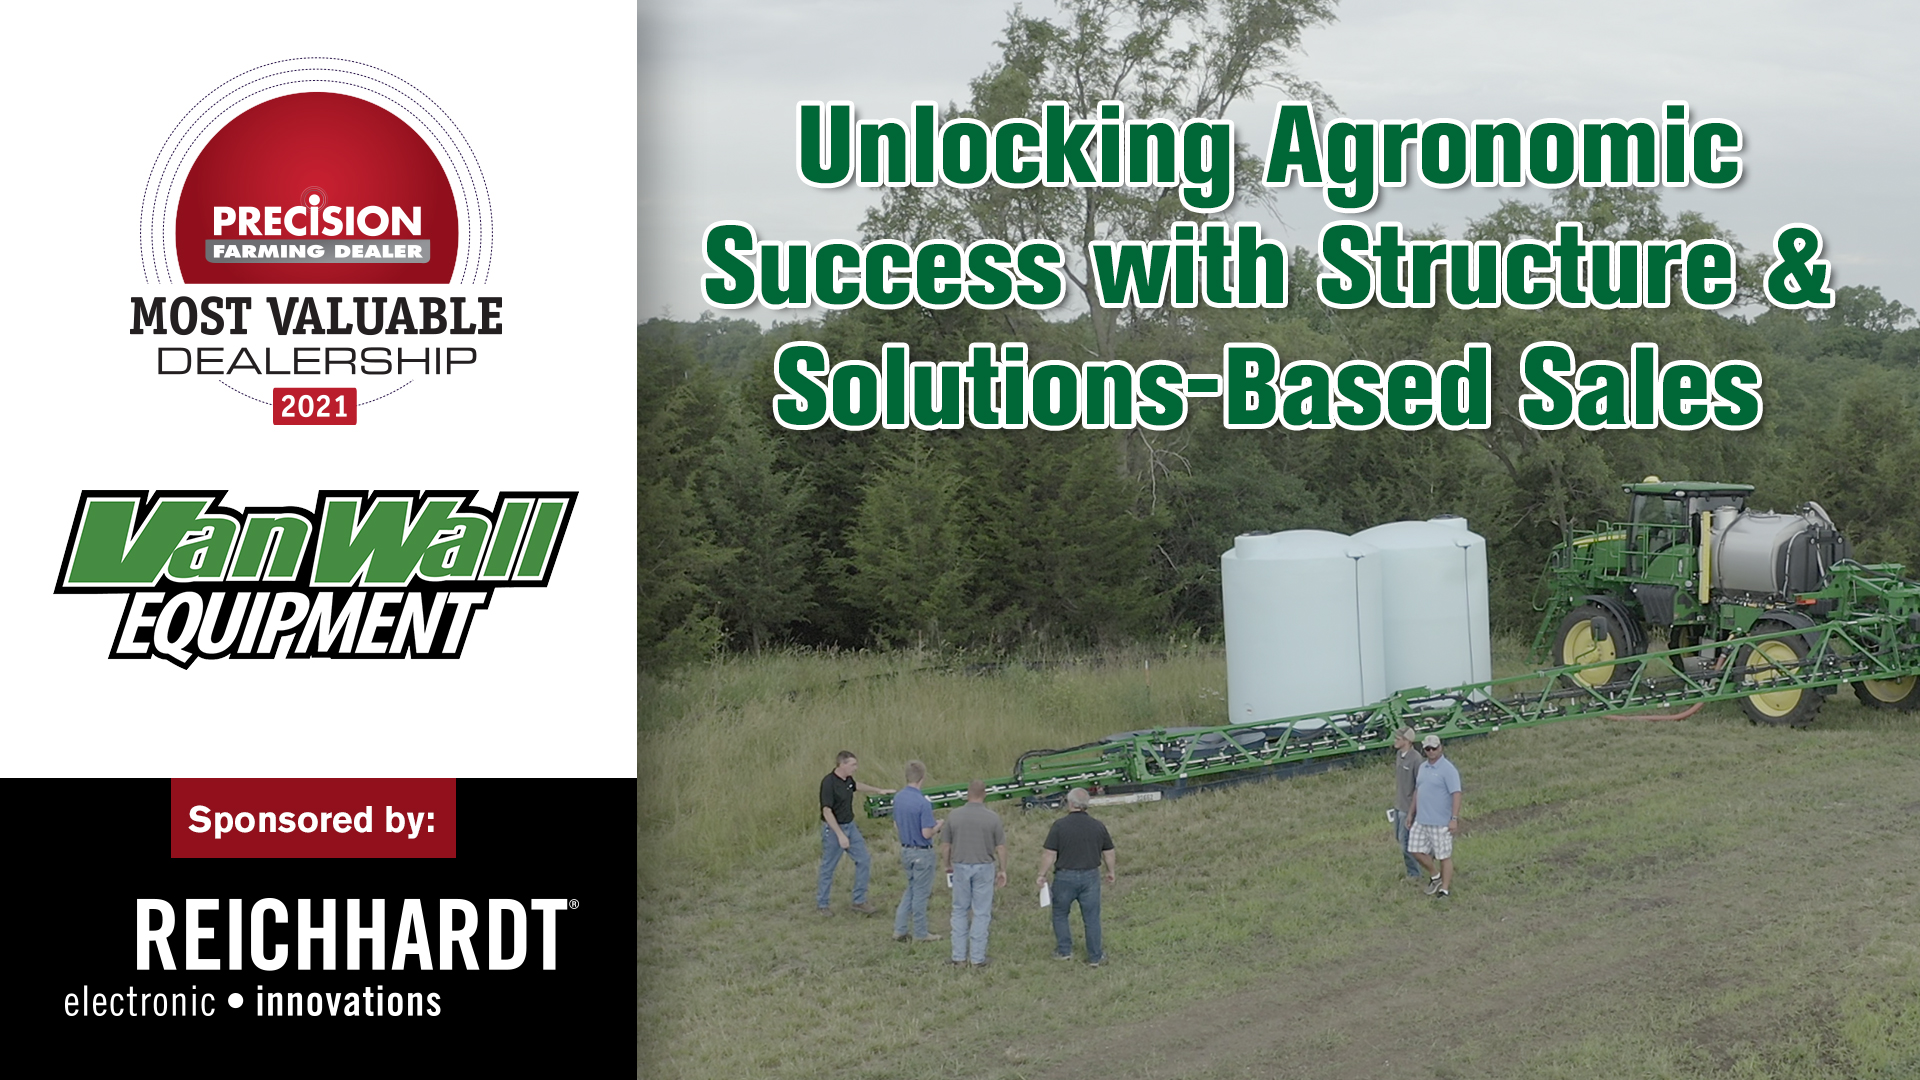 Unlocking Agronomic Success with Structure & Solutions-Based Sales